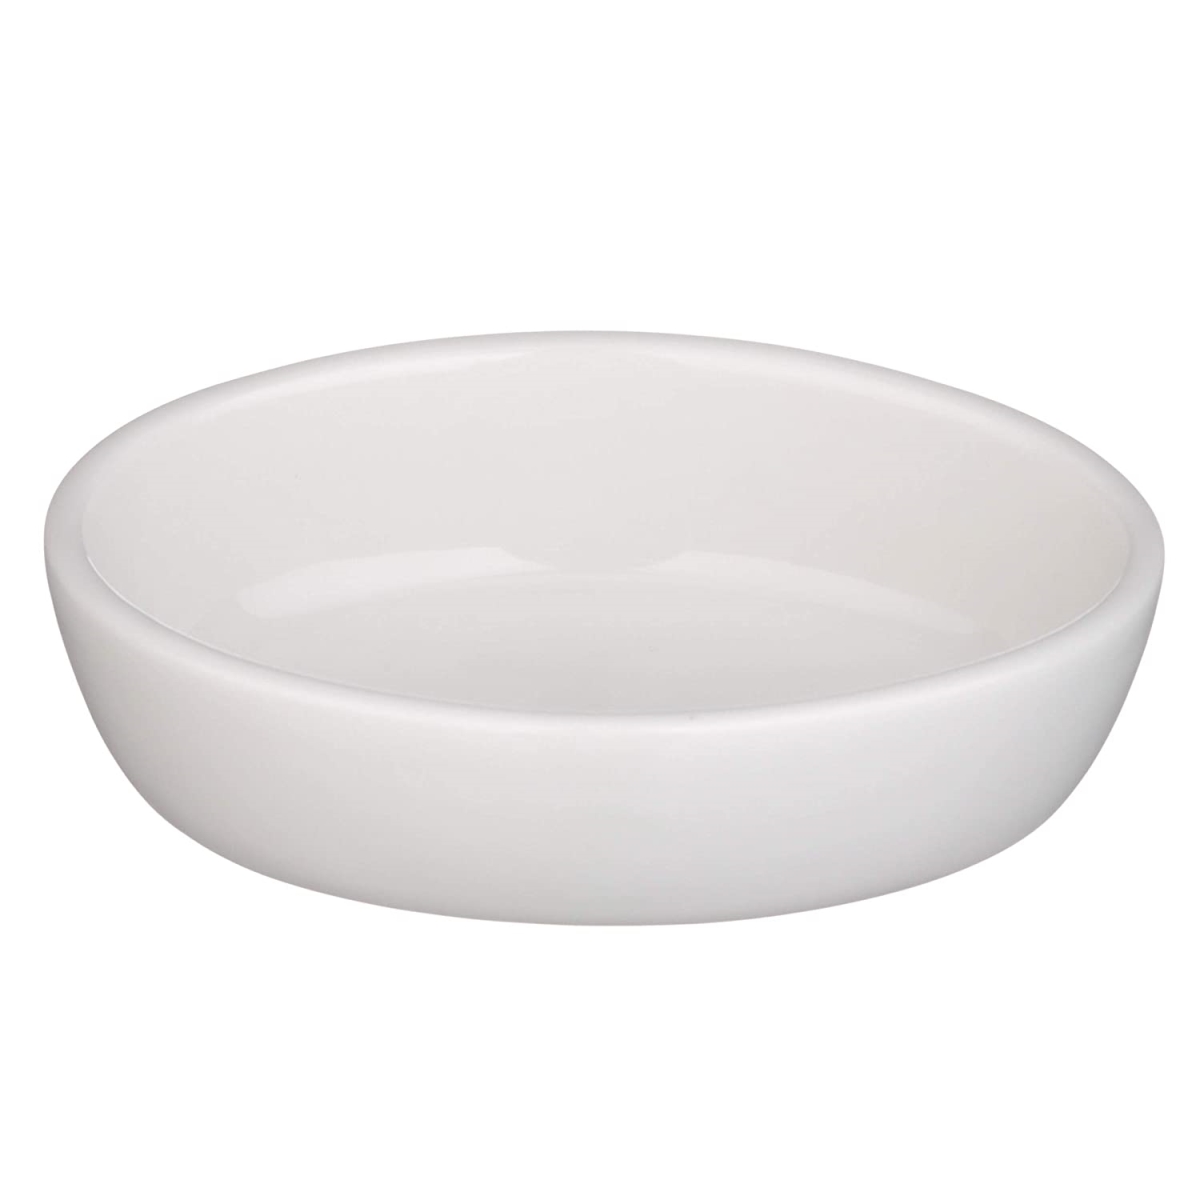 Picture of Oneida F1400000634 20 oz Porcelain Tundra Bakers Dish